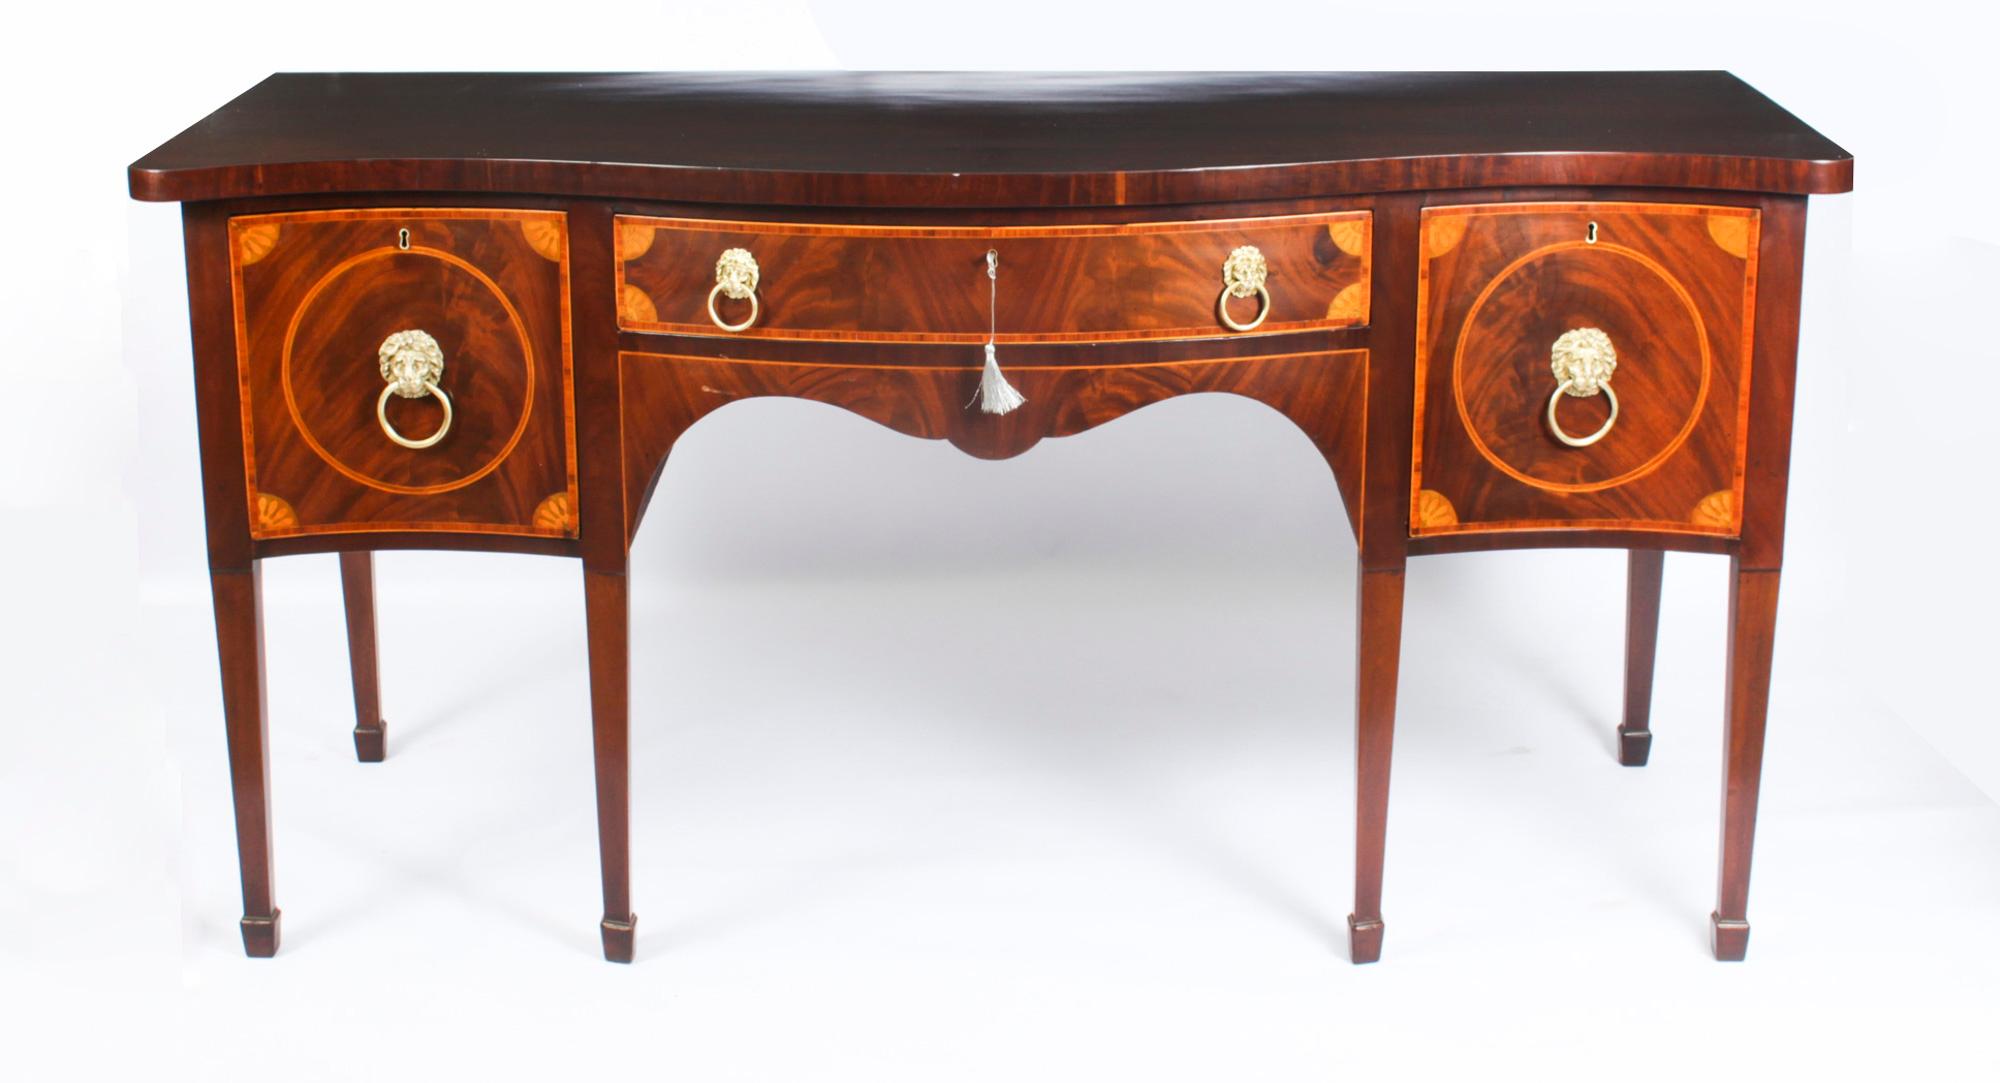 This is a superb antique George III inlaid flame mahogany serpentine sideboard, circa 1790 in date.
 
With wood banding and marquetry spandrels, the central frieze drawer flanked by deep drawers, the right side drawer with divisions for bottles. The